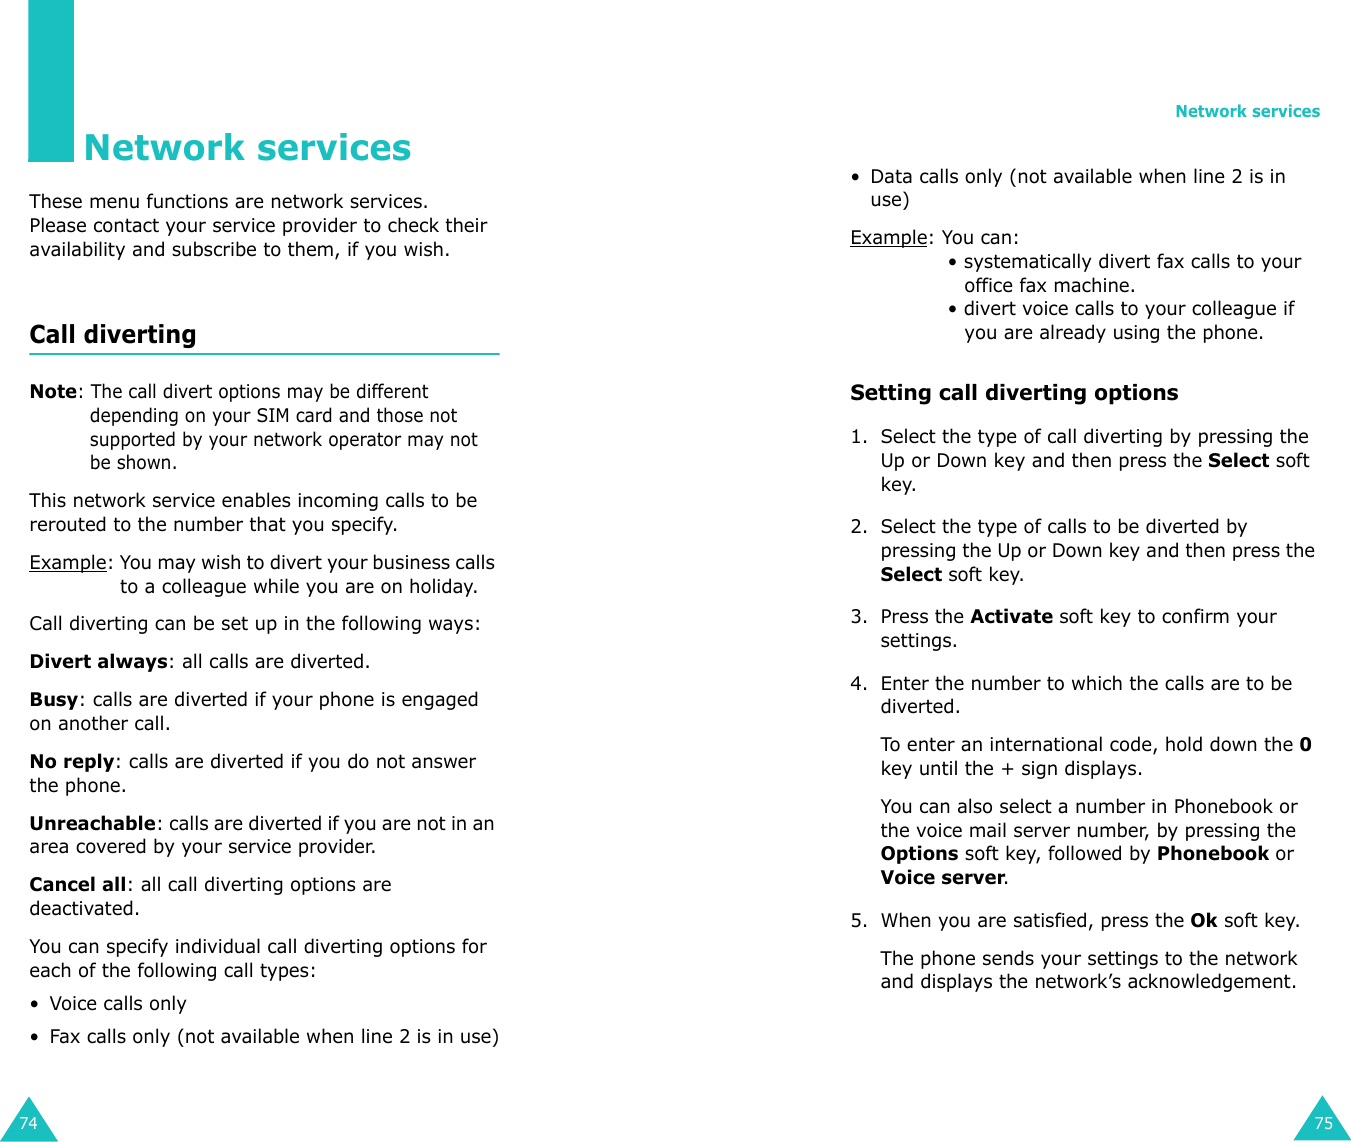 74Network servicesThese menu functions are network services.Please contact your service provider to check their availability and subscribe to them, if you wish.Call diverting Note: The call divert options may be different depending on your SIM card and those not supported by your network operator may not be shown.This network service enables incoming calls to be rerouted to the number that you specify.Example: You may wish to divert your business calls to a colleague while you are on holiday.Call diverting can be set up in the following ways:Divert always: all calls are diverted.Busy: calls are diverted if your phone is engaged on another call.No reply: calls are diverted if you do not answer the phone.Unreachable: calls are diverted if you are not in an area covered by your service provider.Cancel all: all call diverting options are deactivated.You can specify individual call diverting options for each of the following call types:• Voice calls only• Fax calls only (not available when line 2 is in use)Network services75• Data calls only (not available when line 2 is in use)Example: You can:• systematically divert fax calls to your office fax machine.• divert voice calls to your colleague if you are already using the phone.Setting call diverting options1. Select the type of call diverting by pressing the Up or Down key and then press the Select soft key.2. Select the type of calls to be diverted by pressing the Up or Down key and then press the Select soft key.3. Press the Activate soft key to confirm your settings.4. Enter the number to which the calls are to be diverted.To enter an international code, hold down the 0 key until the + sign displays. You can also select a number in Phonebook or the voice mail server number, by pressing the Options soft key, followed by Phonebook or Voice server.5. When you are satisfied, press the Ok soft key. The phone sends your settings to the network and displays the network’s acknowledgement.